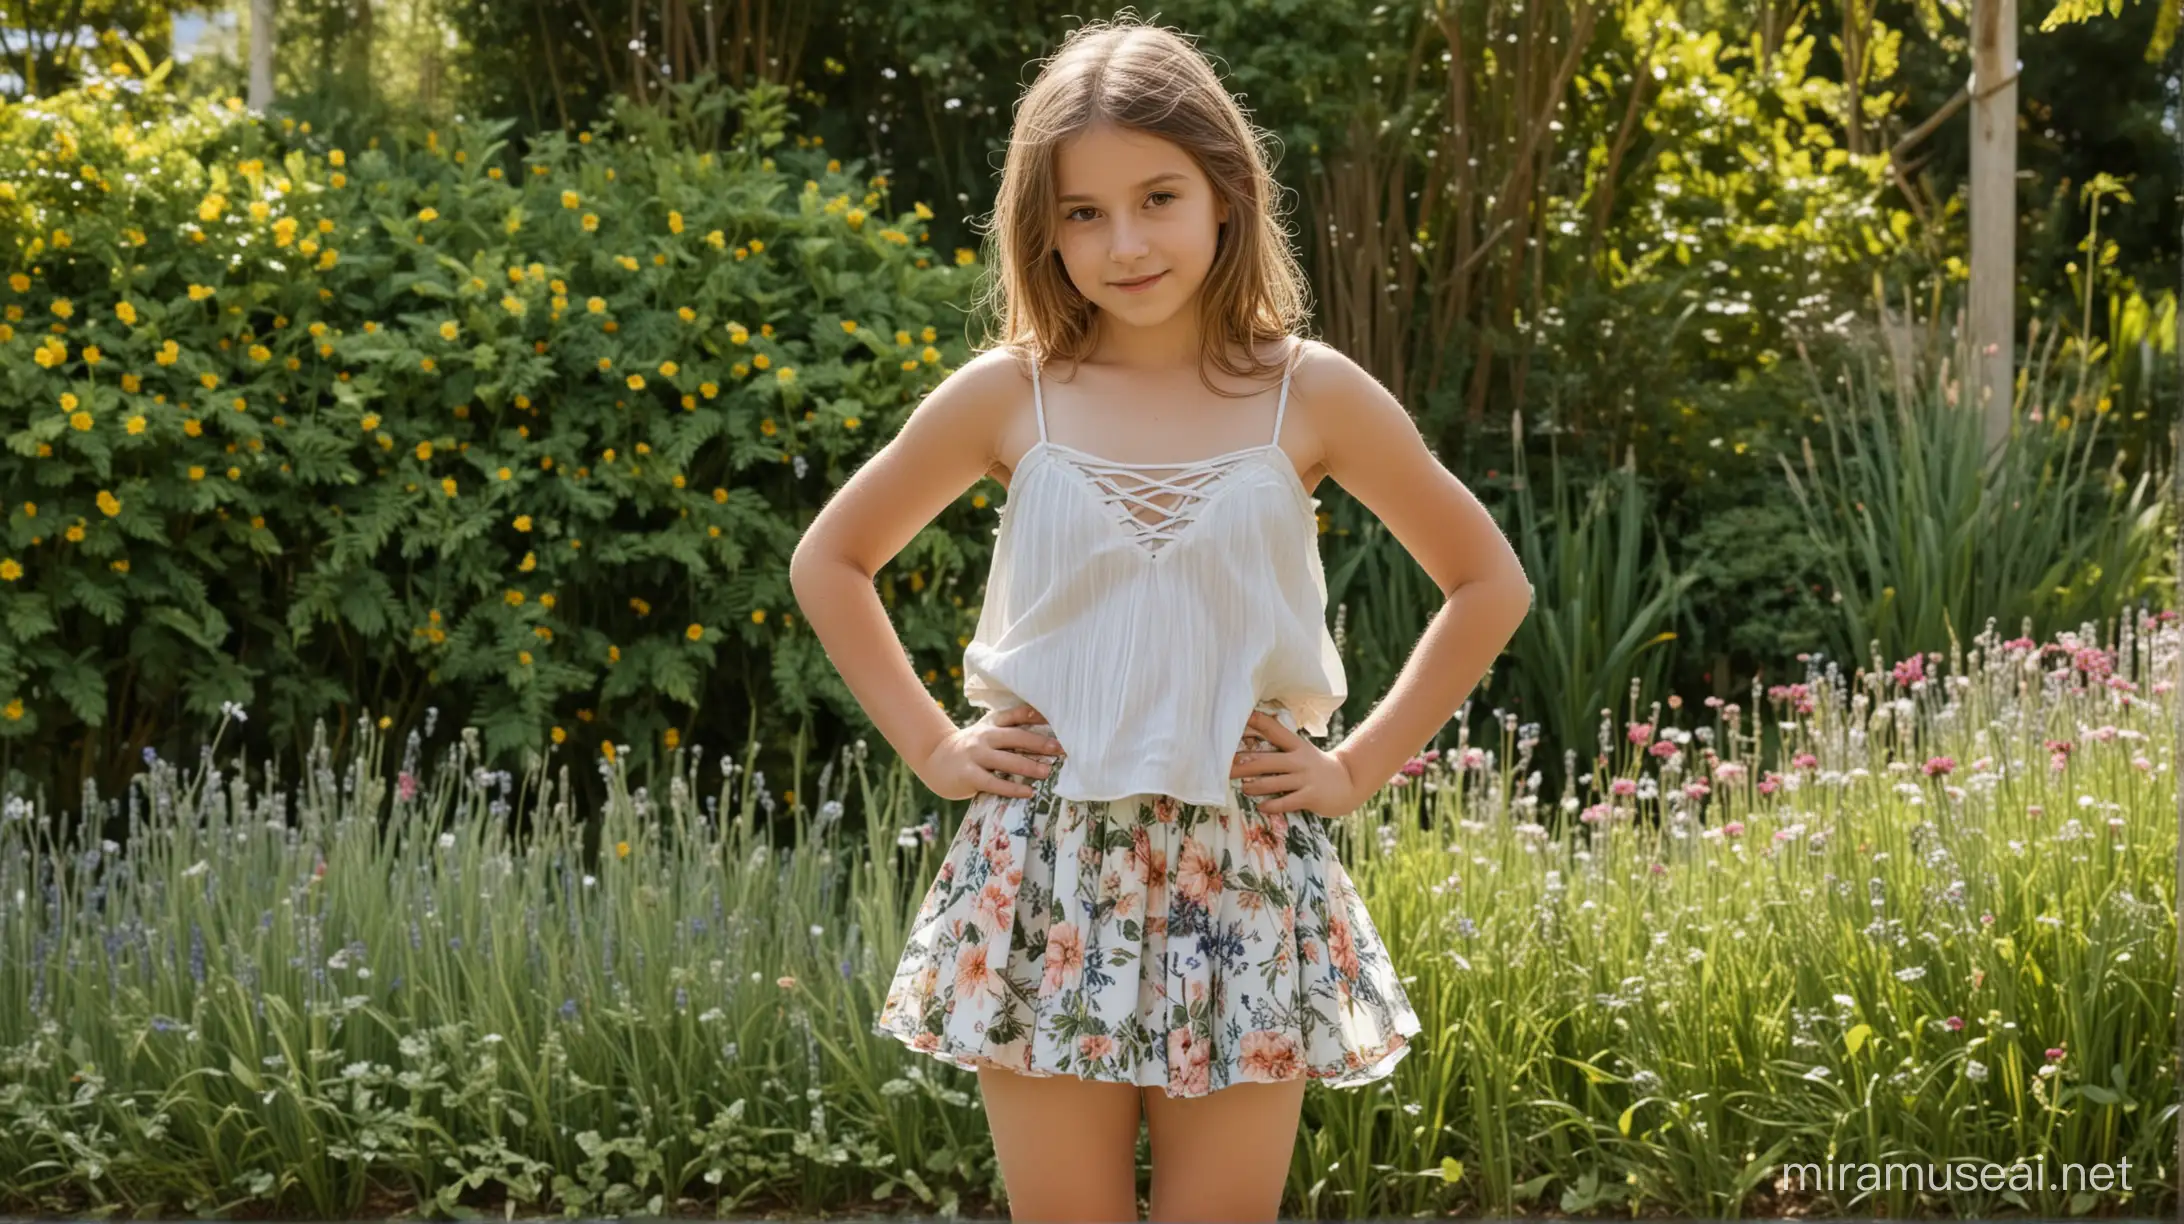 10 years old girl, wearing strappy camisole with flowy mini skirt in garden
